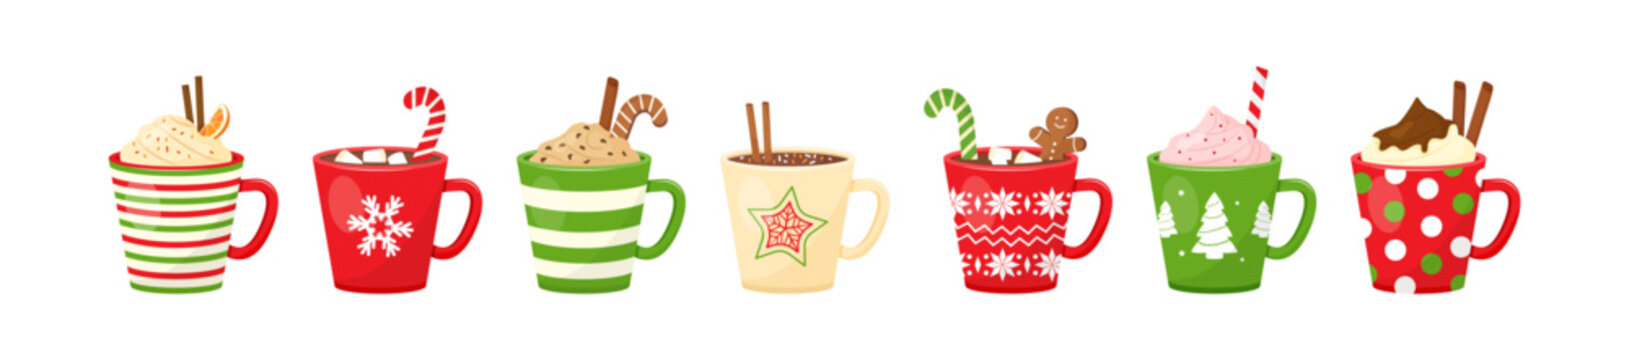 Christmas hot chocolate and cocoa, cartoon mug with drink vector icon, coffee, latte and tea. Holiday winter set. Cute menu illustration